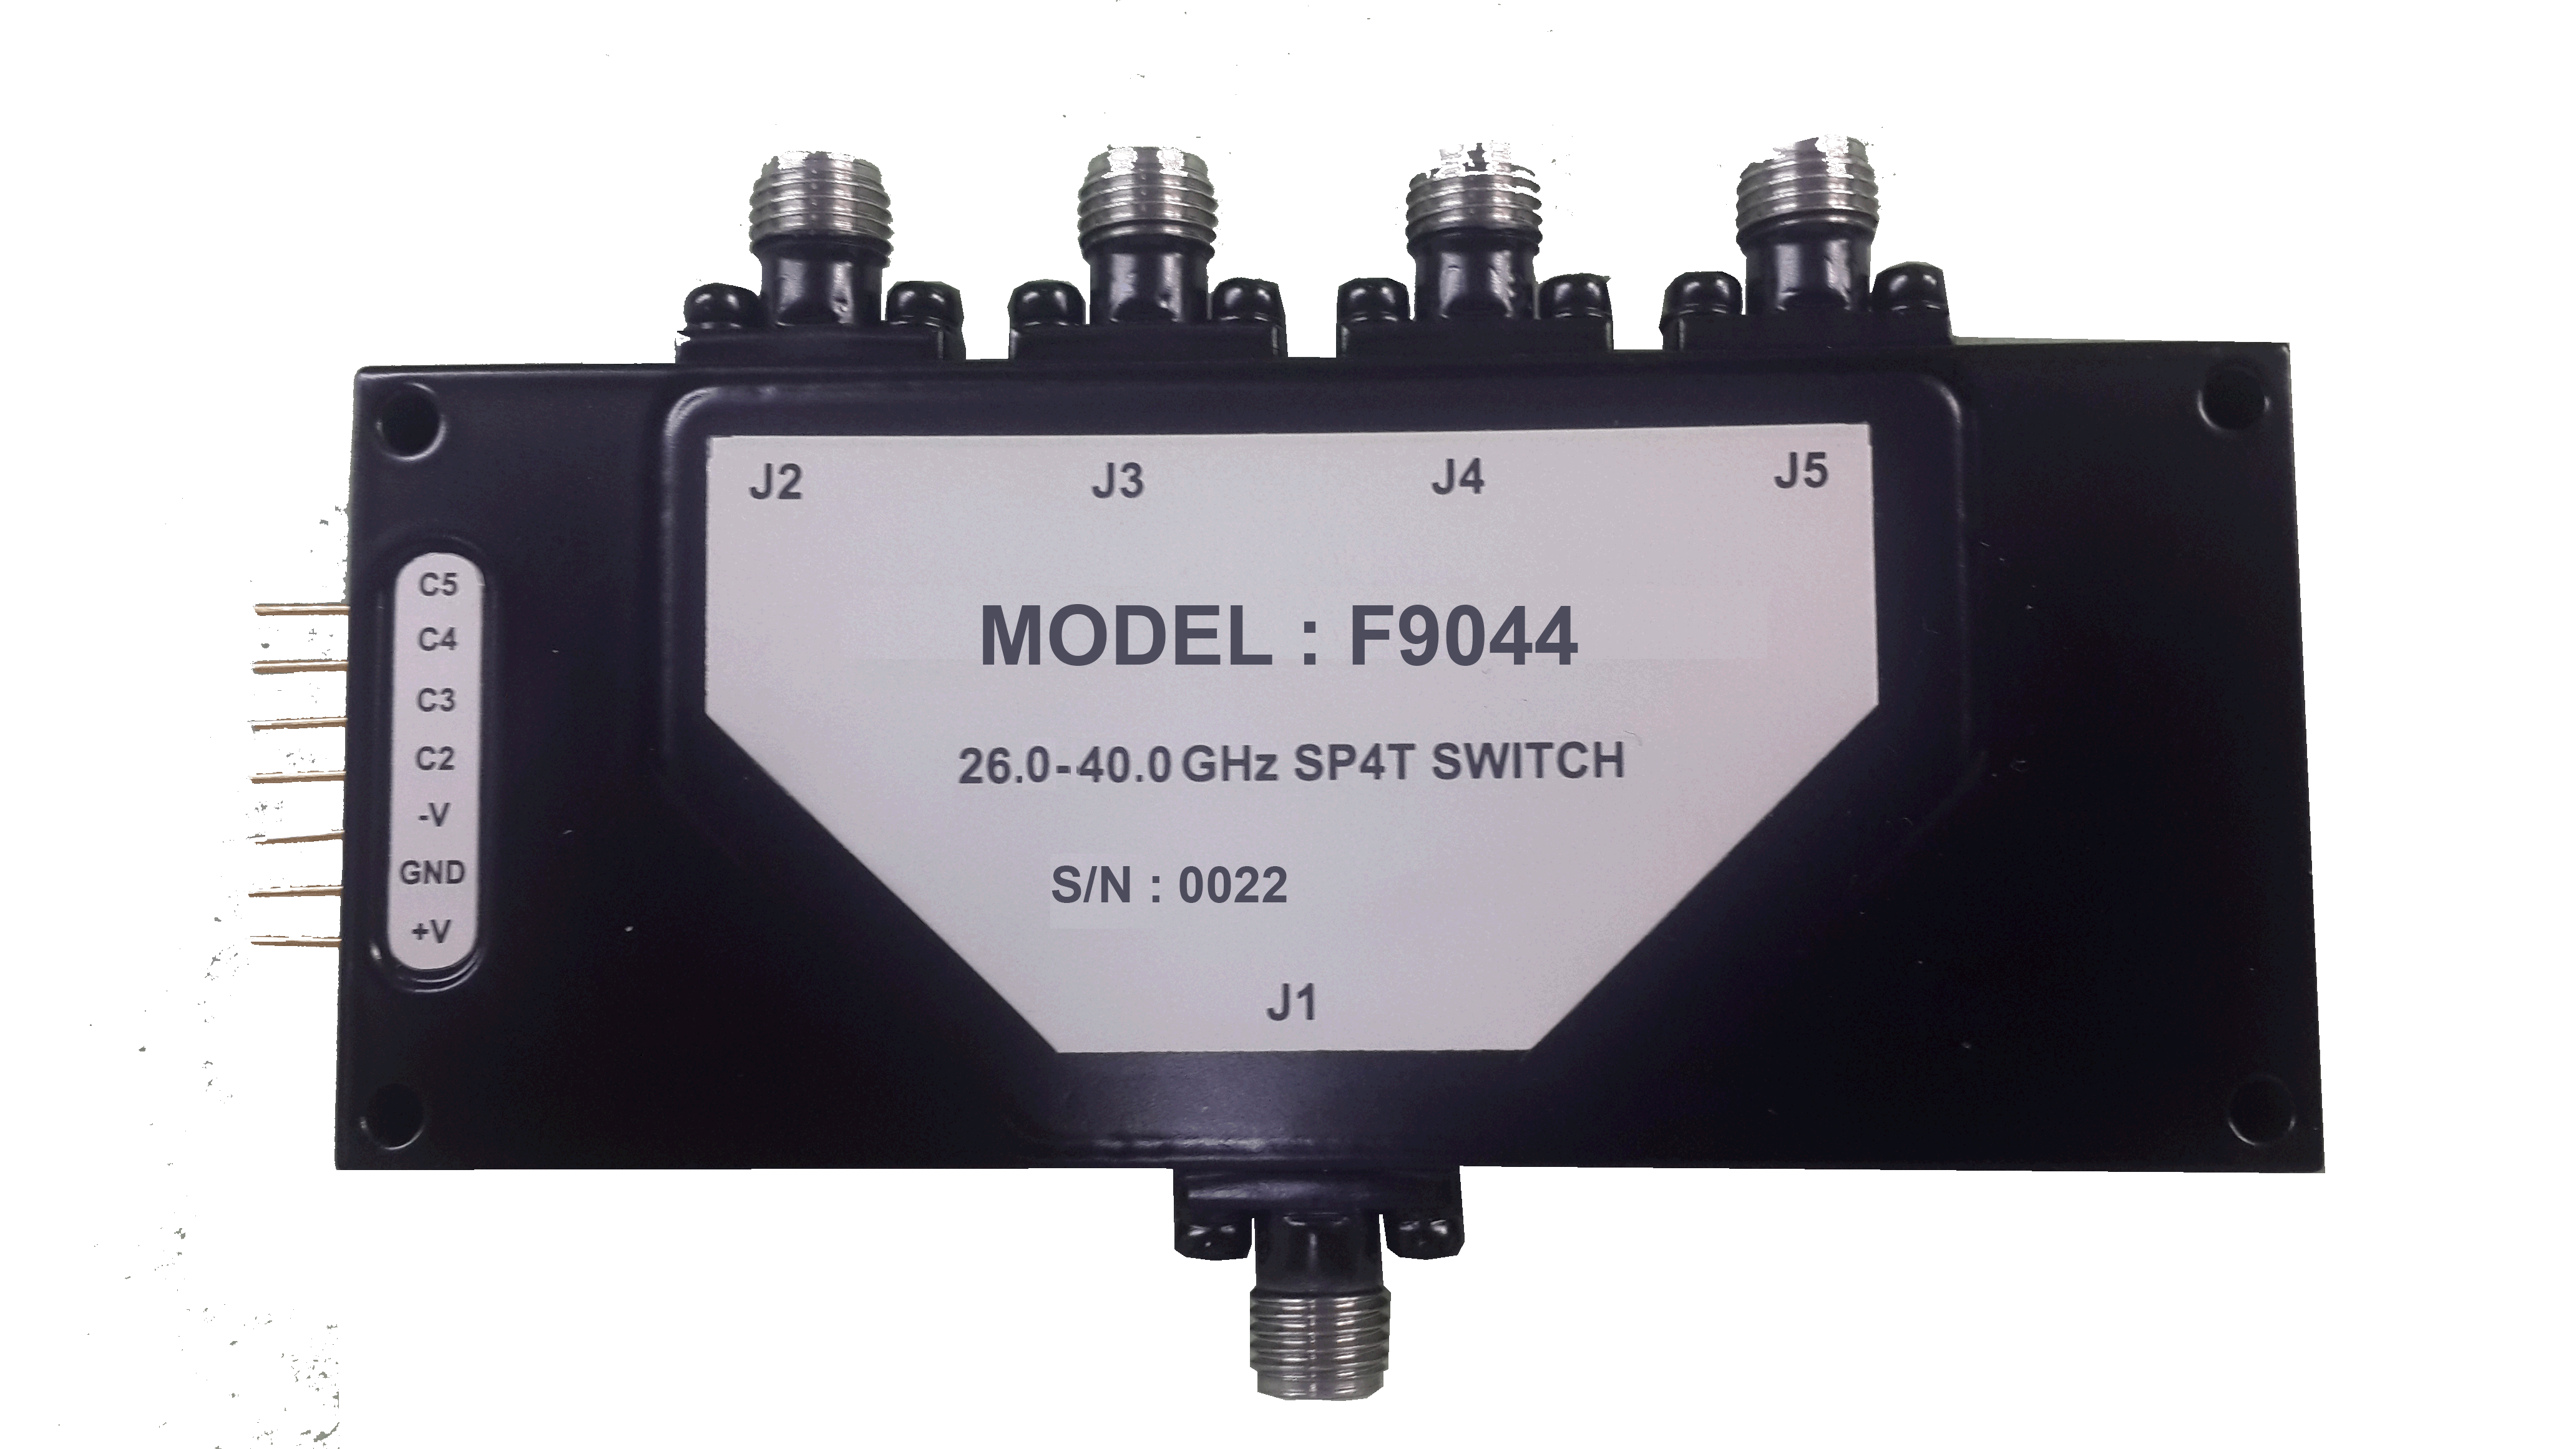 Series 90 Millimeter Wave SP4T Switch